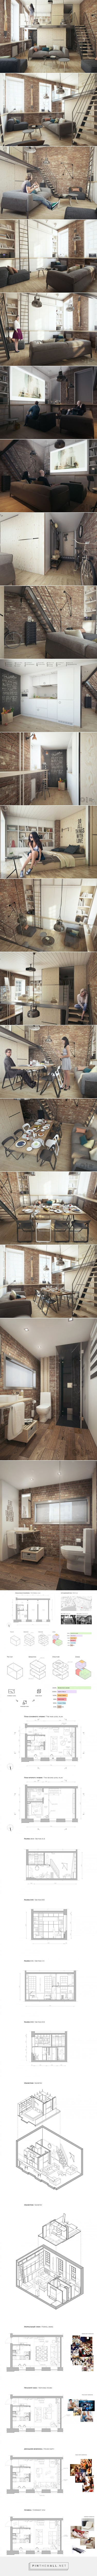 A Super Small Apartment That Adapts To Its Owners Needs… – a grouped images…